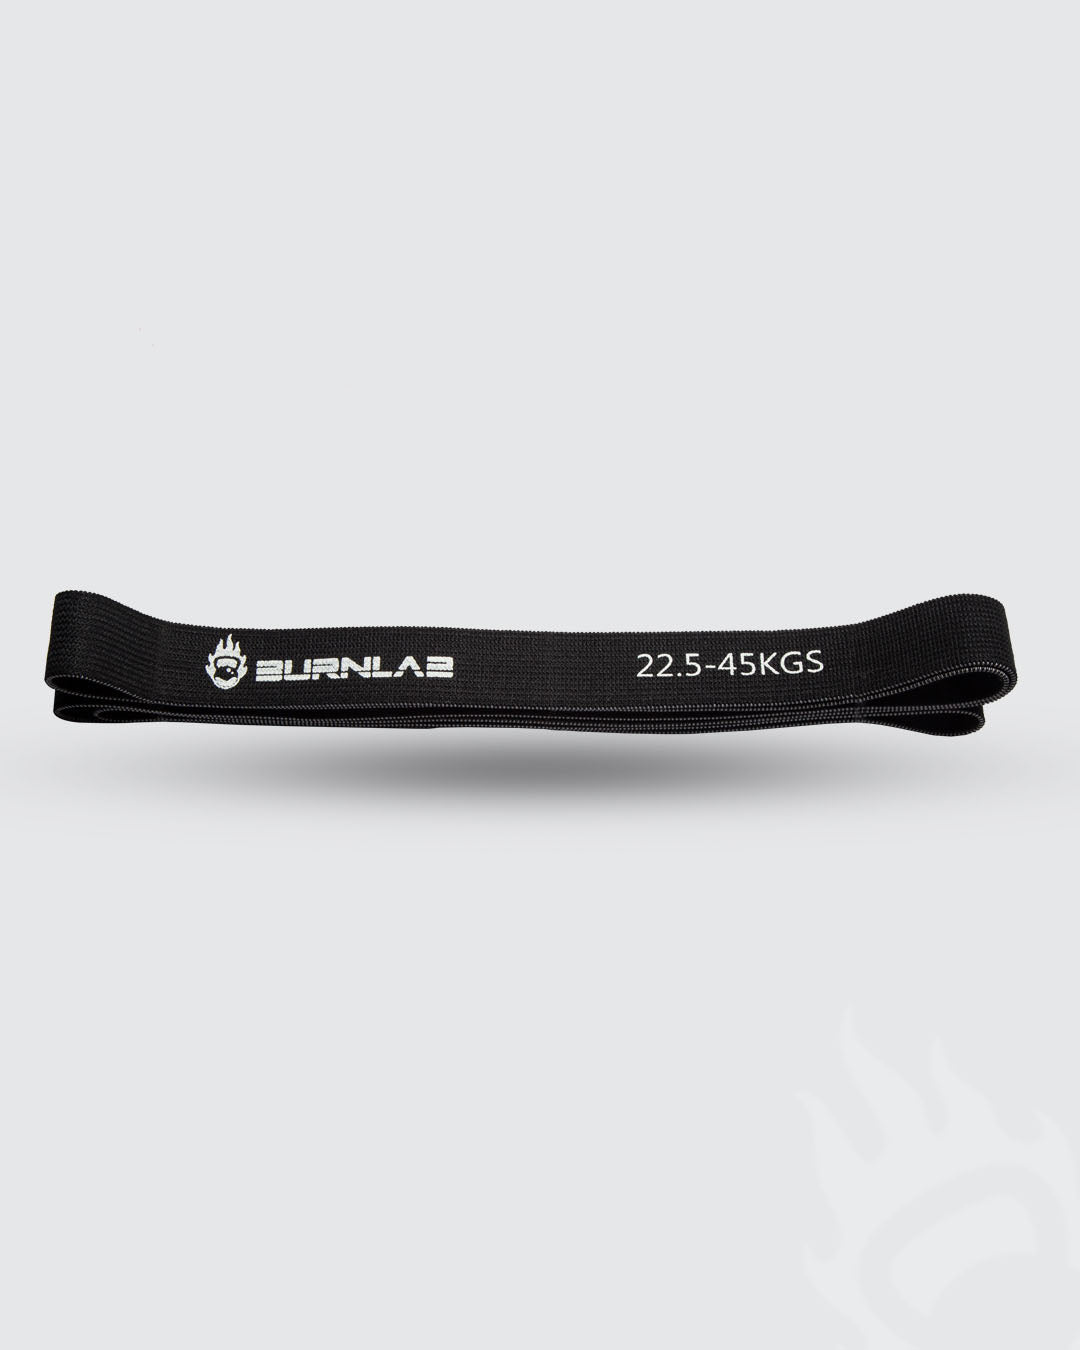 Fabric Resistance Band For Strength Training, Stretching and Pull Up Assist - Burnlab.Co